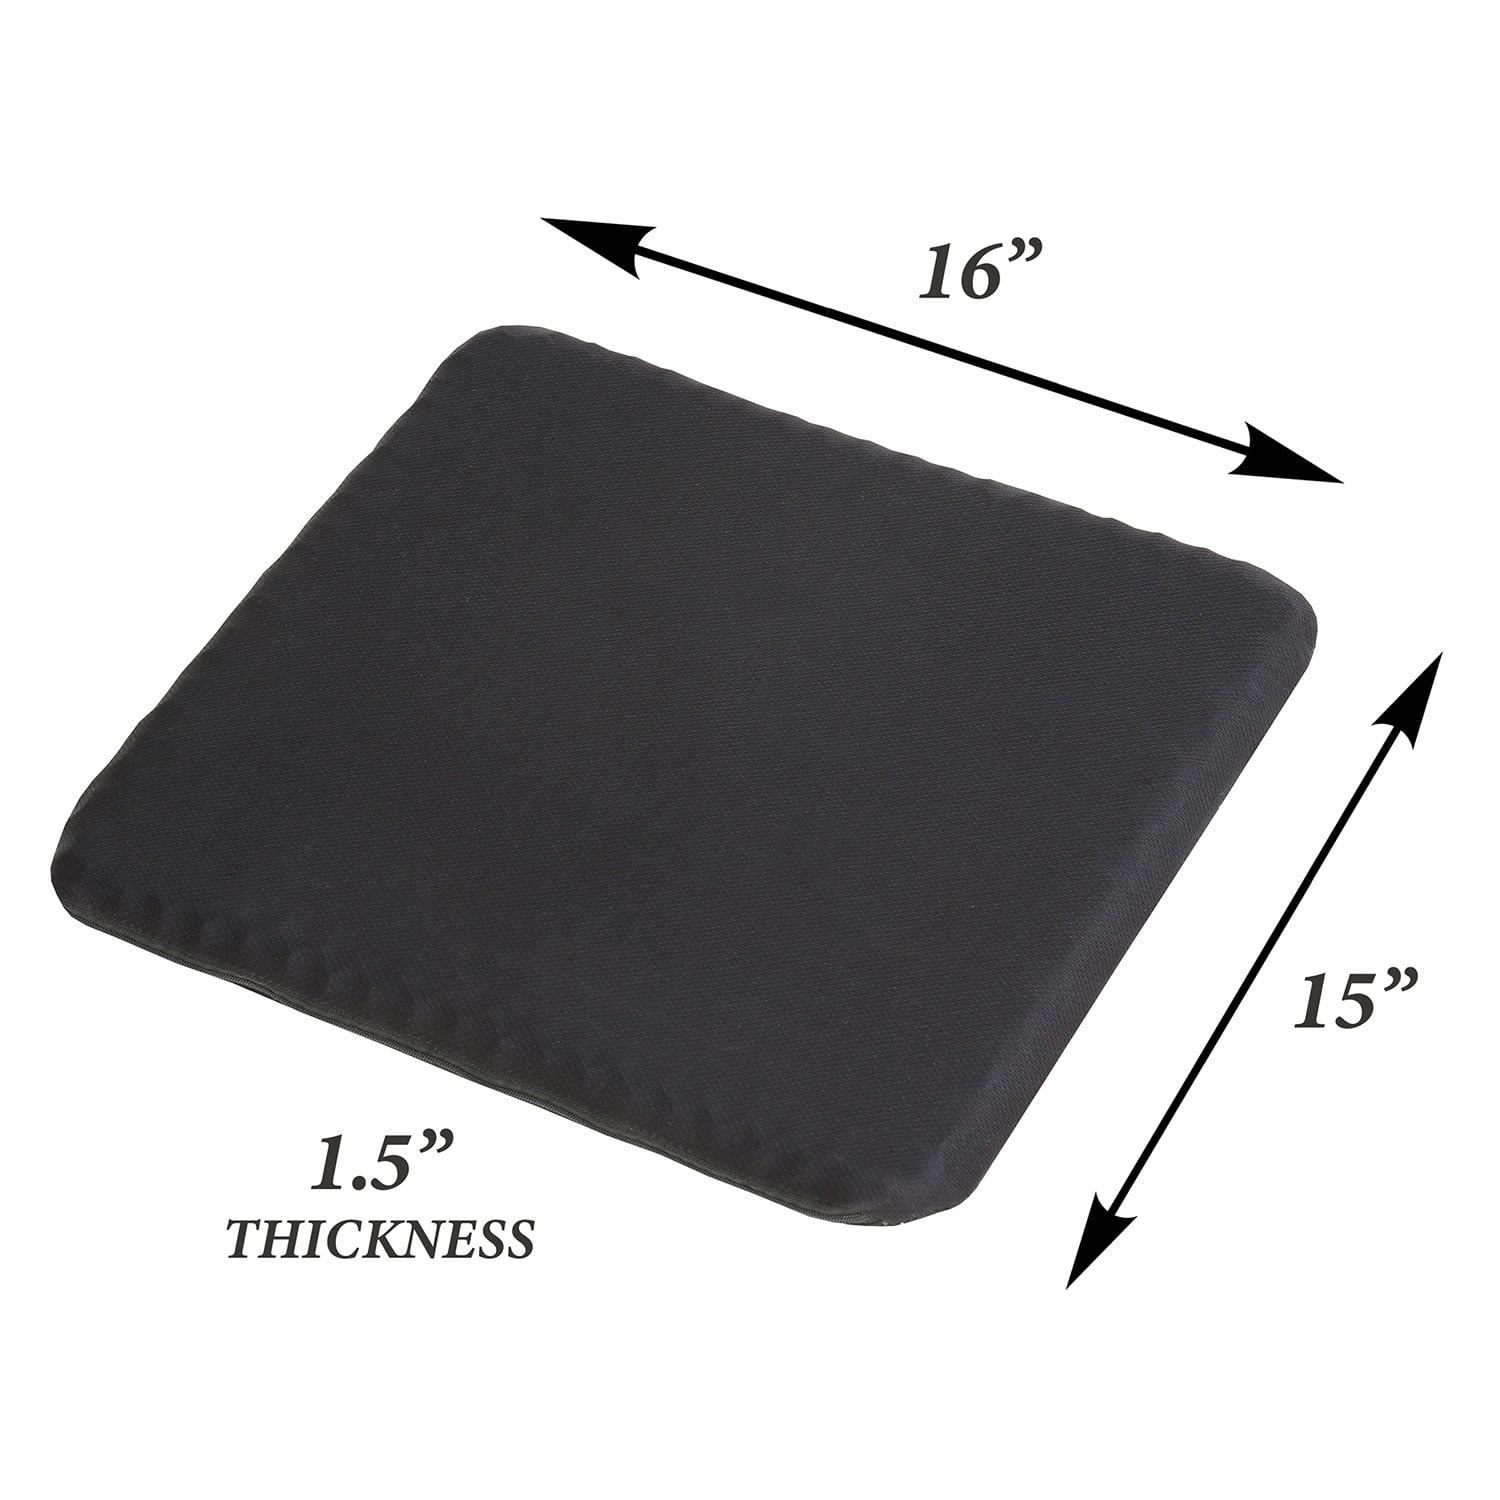 GELRIDE Advanced Gel Seat Cushion - Prevents Pressure Sores, Sciatica and  Tailbone pain- Knee Support - Buy GELRIDE Advanced Gel Seat Cushion -  Prevents Pressure Sores, Sciatica and Tailbone pain- Knee Support